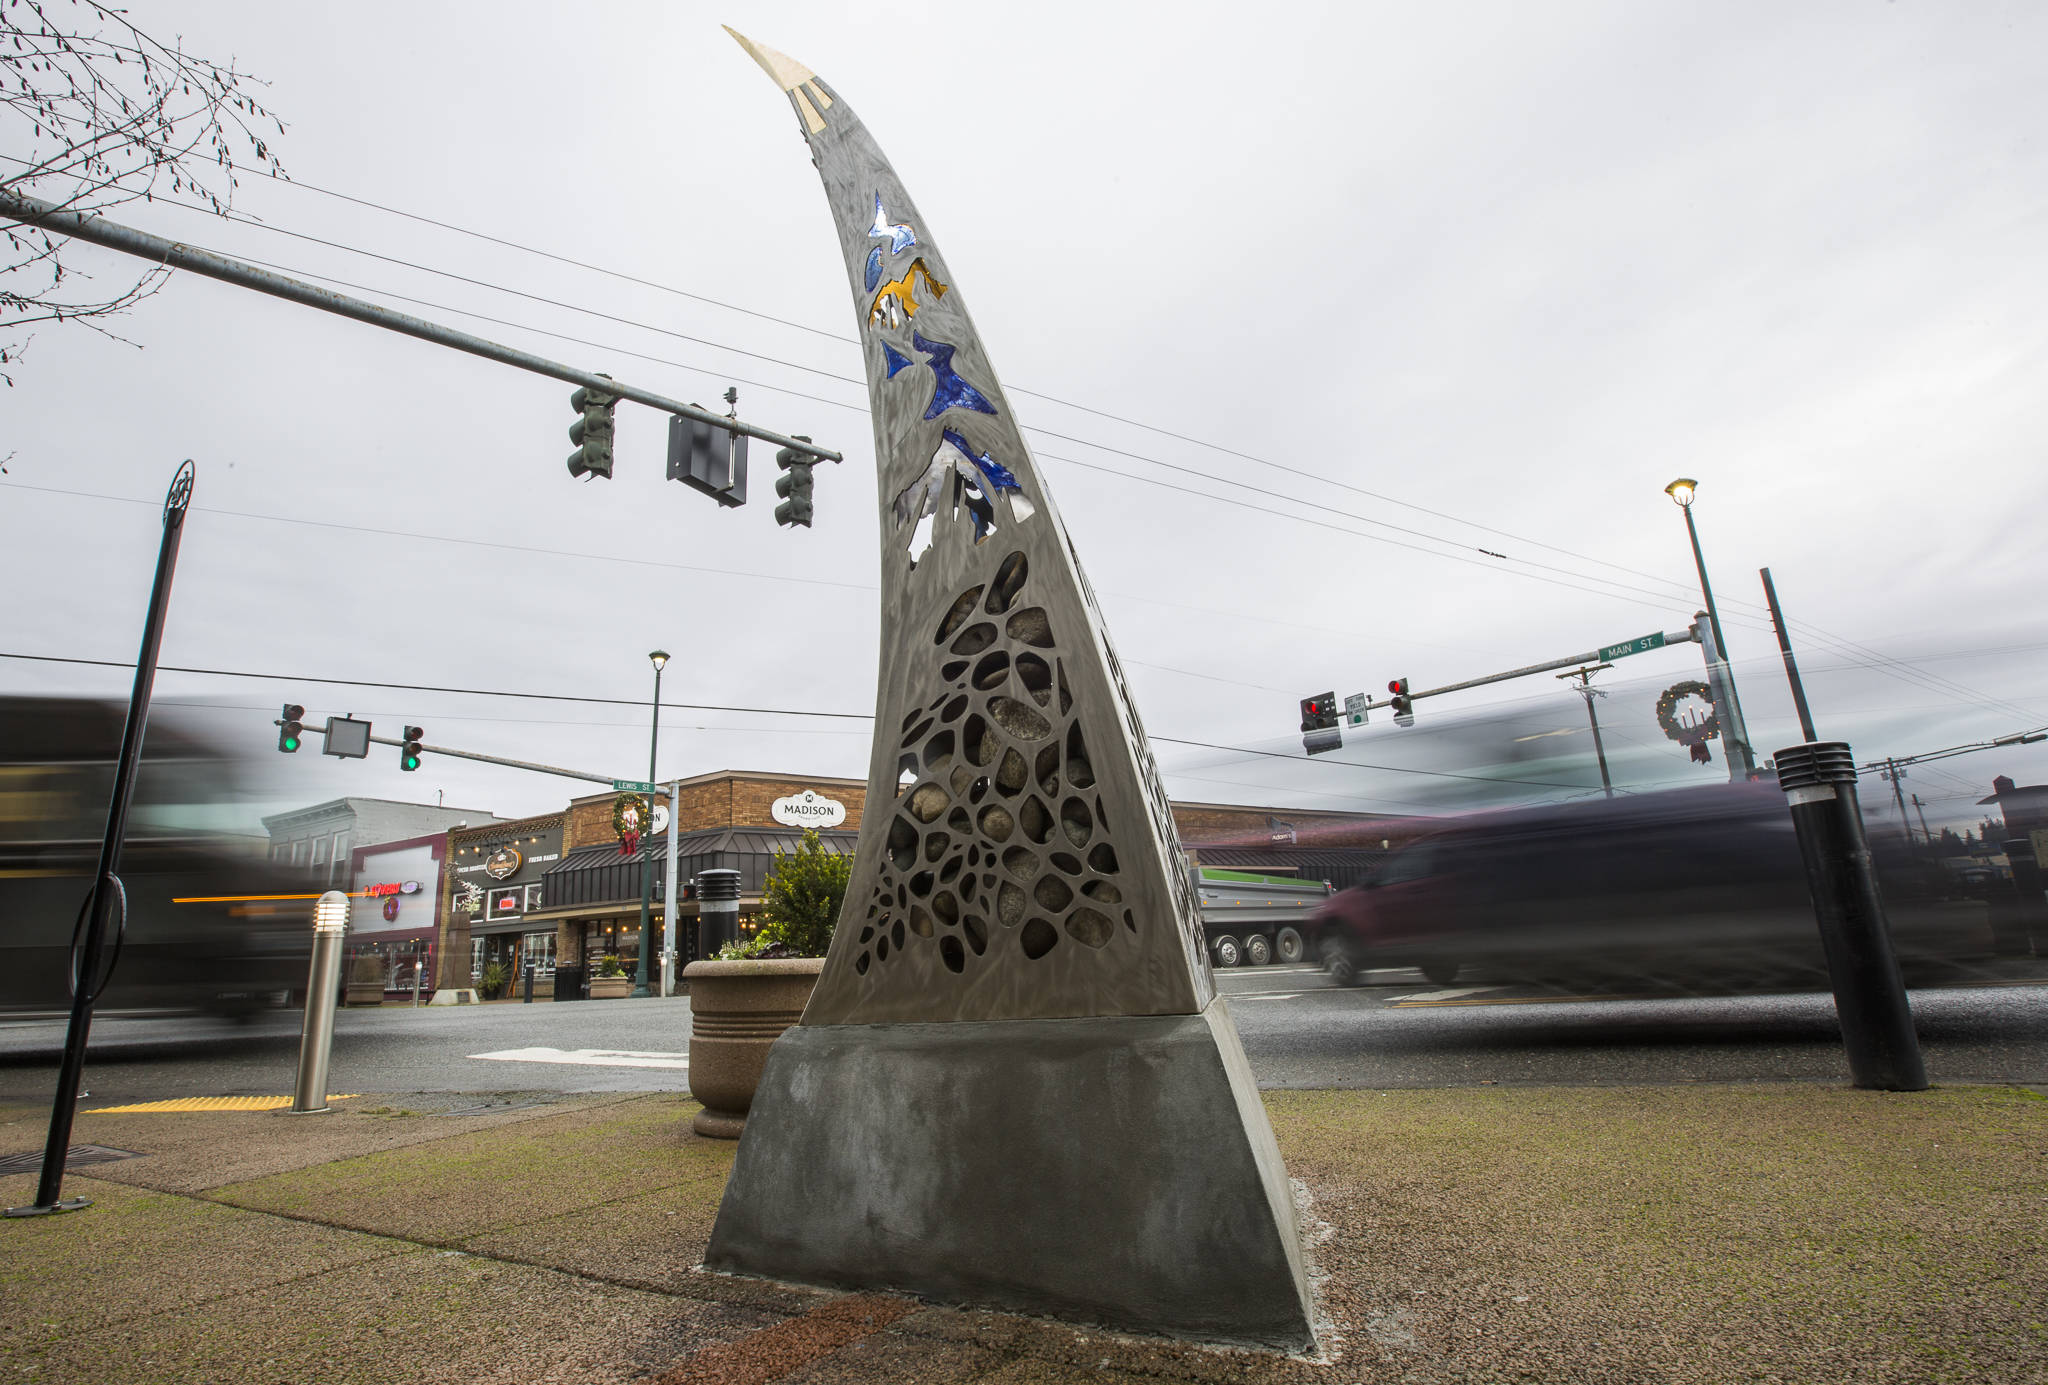 Cars drive by the new “Guardians of the Mountain Pass” sculpture by Milo White and Jay Bowen on the southeast corner of Main and Lewis streets. The sculpture was commissioned by the city of Monroe. (Olivia Vanni / The Herald)